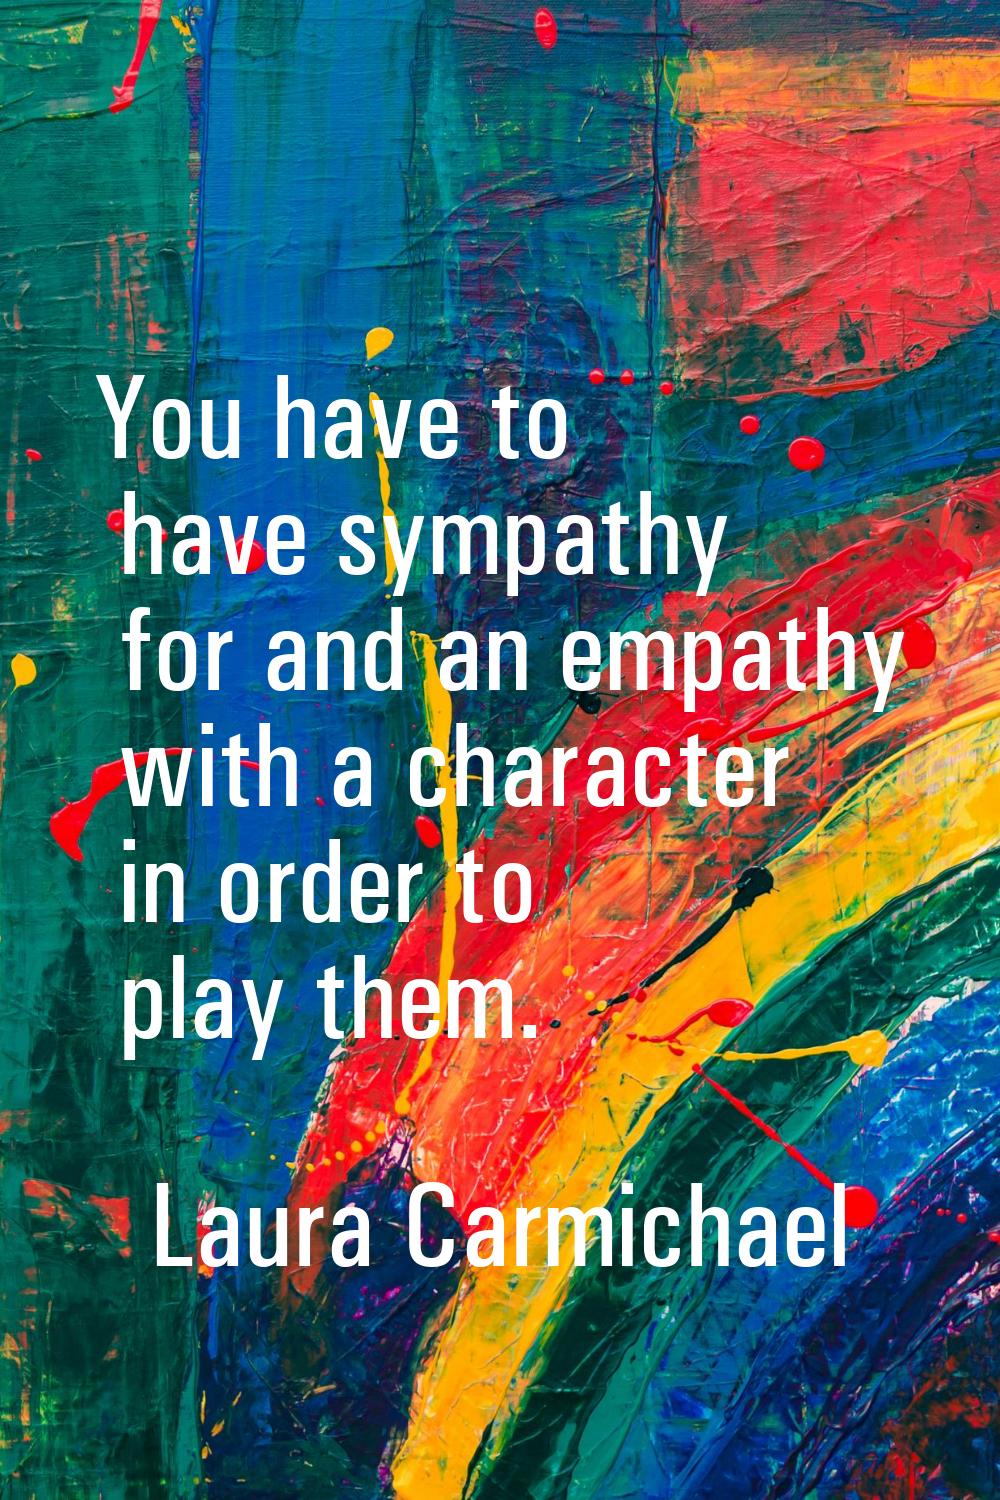 You have to have sympathy for and an empathy with a character in order to play them.